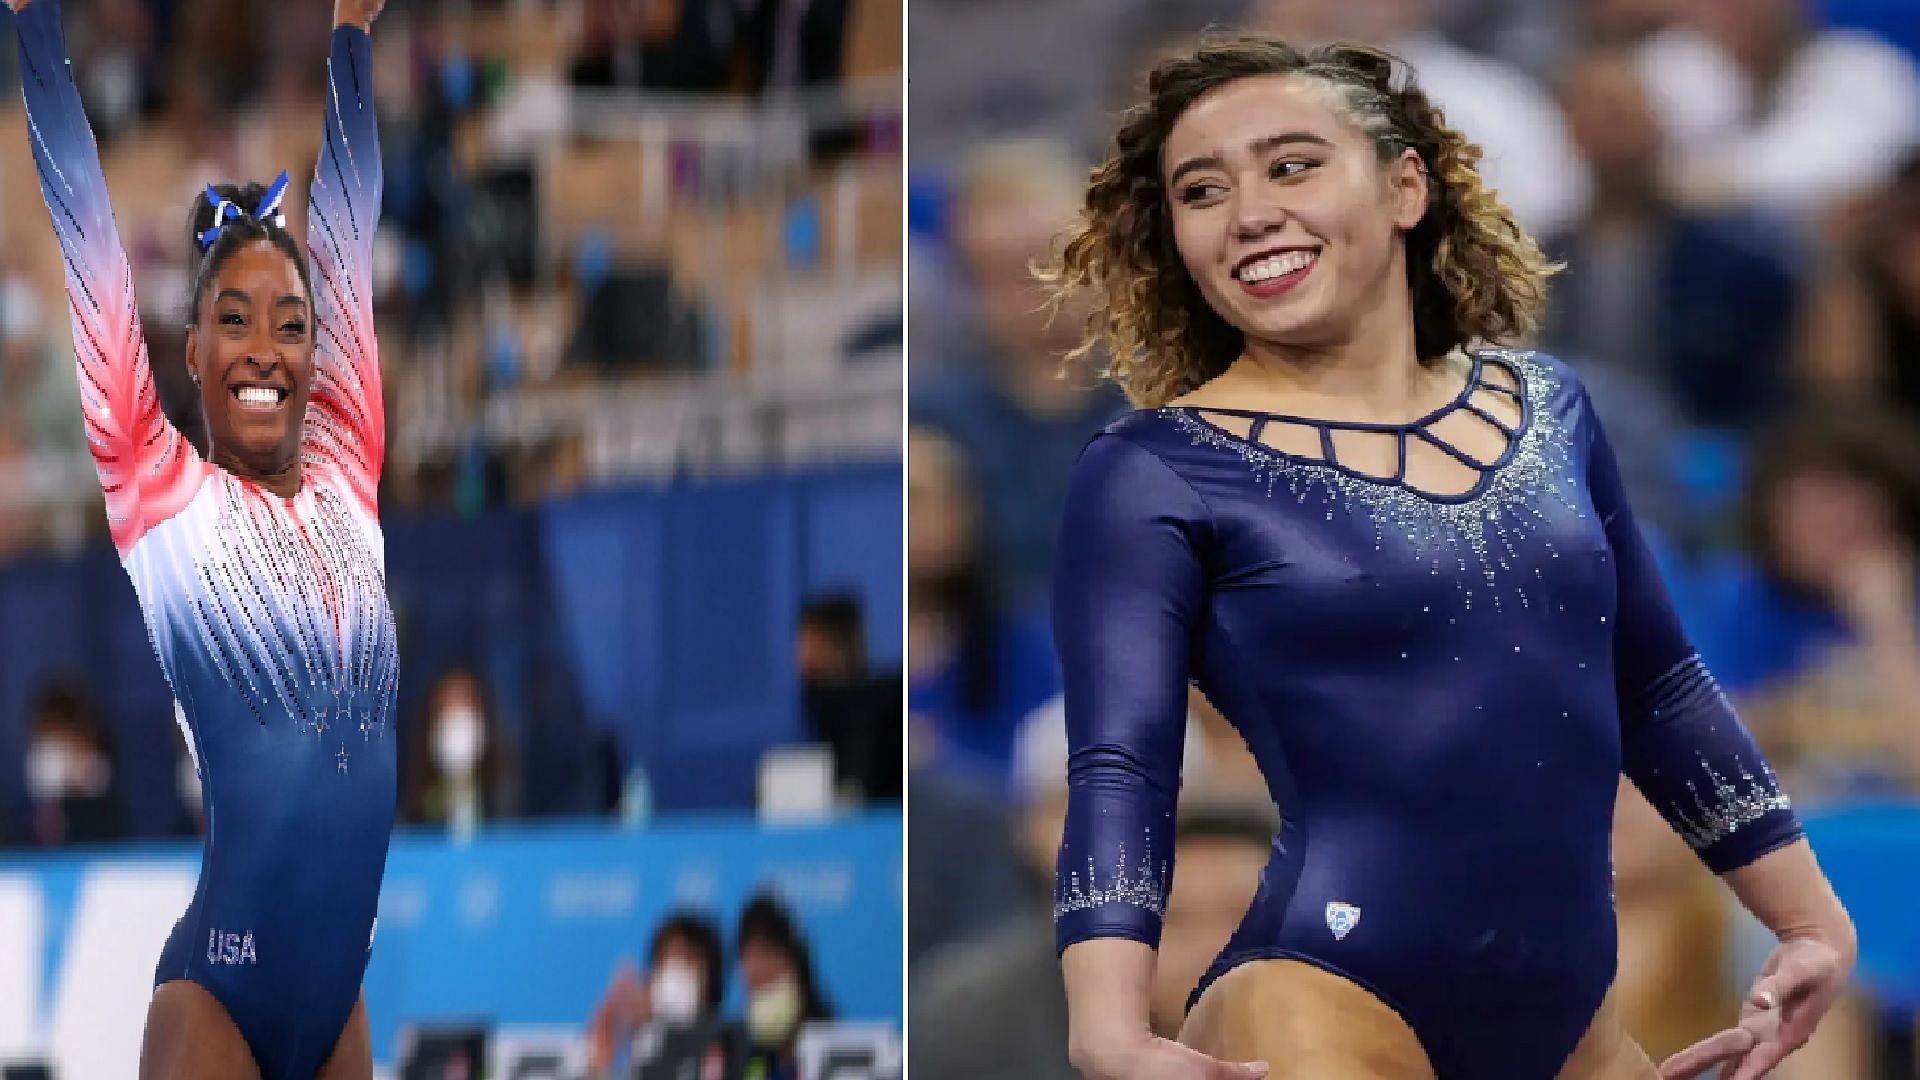 Did Katelyn Ohashi ever beat Simone Biles in competition?